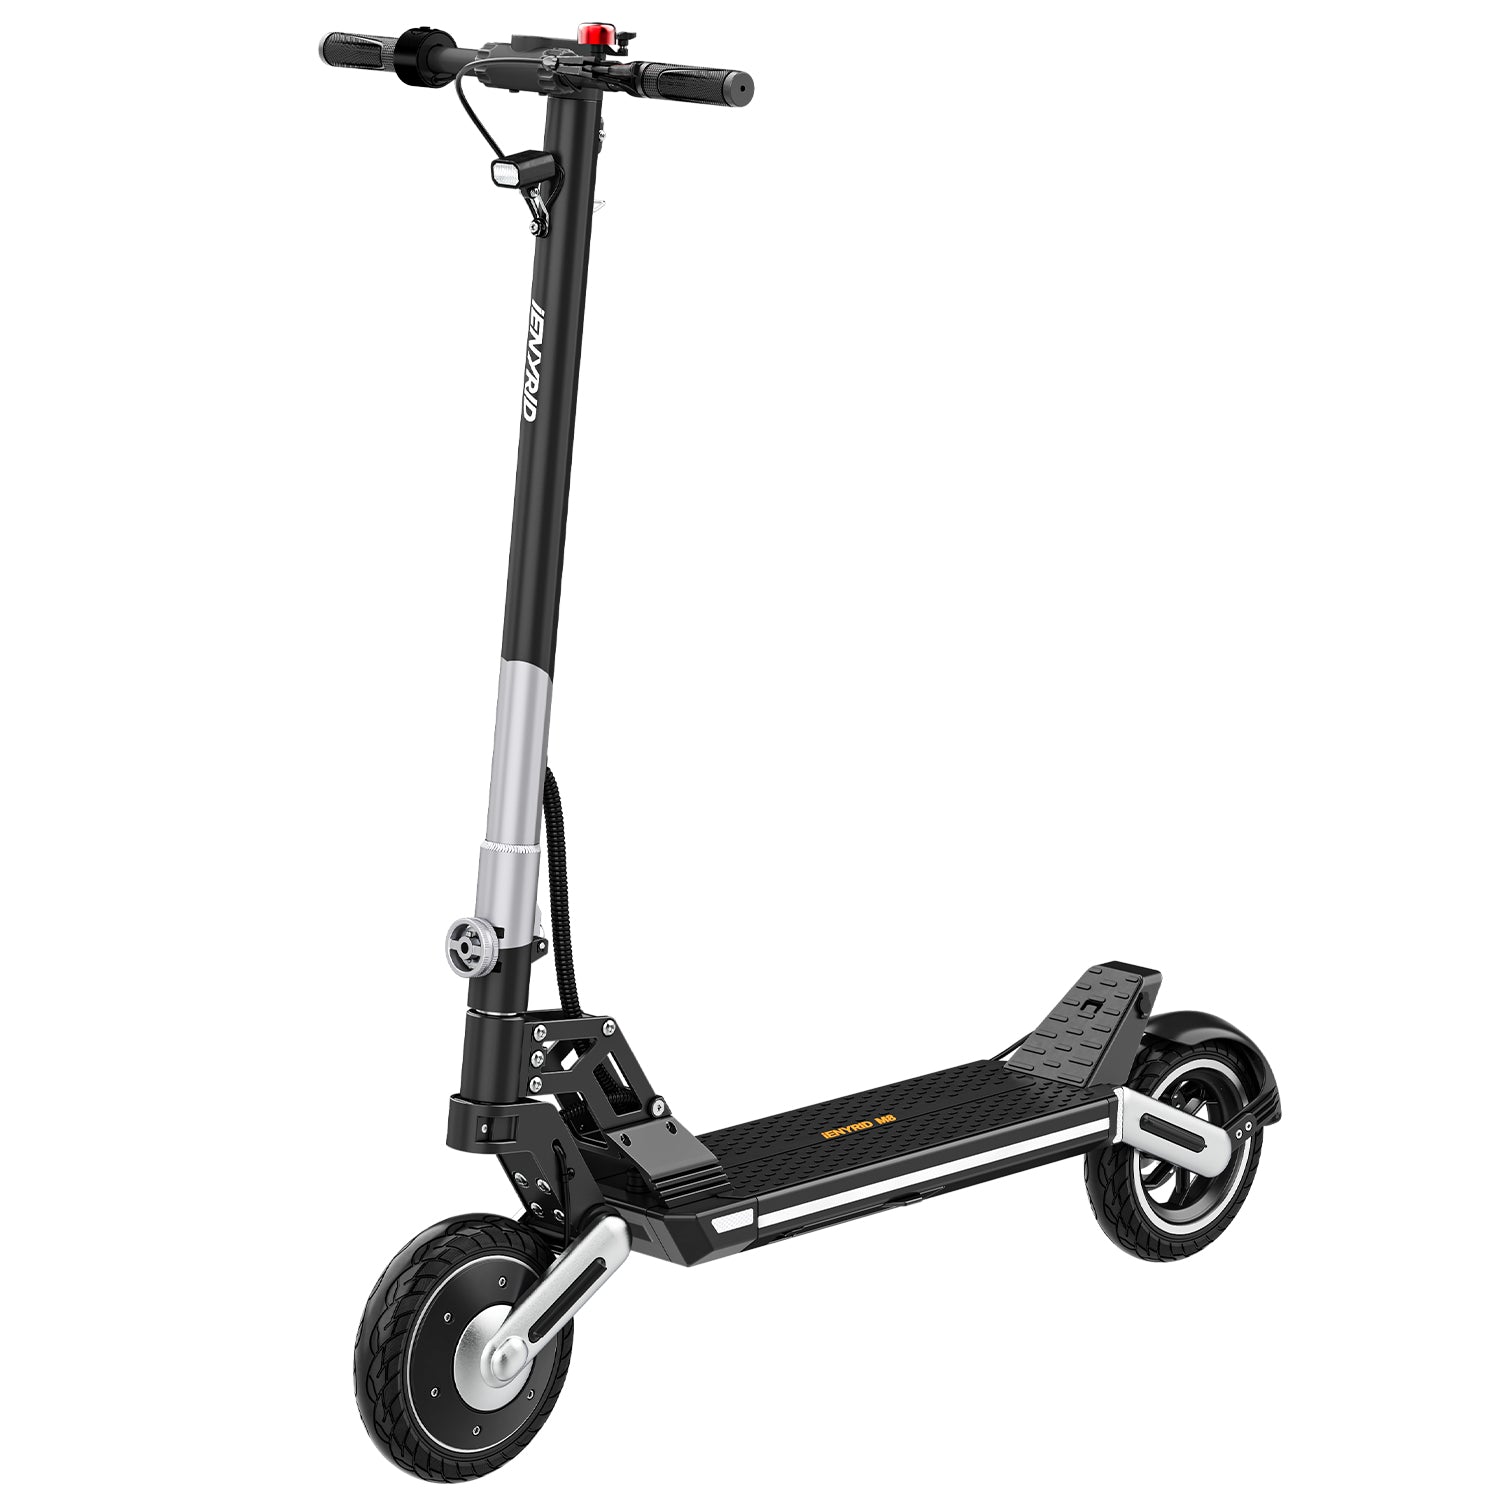 IENYRID M8 500W Motor 10 Inch Off-road Electric Scooter 10Ah Battery